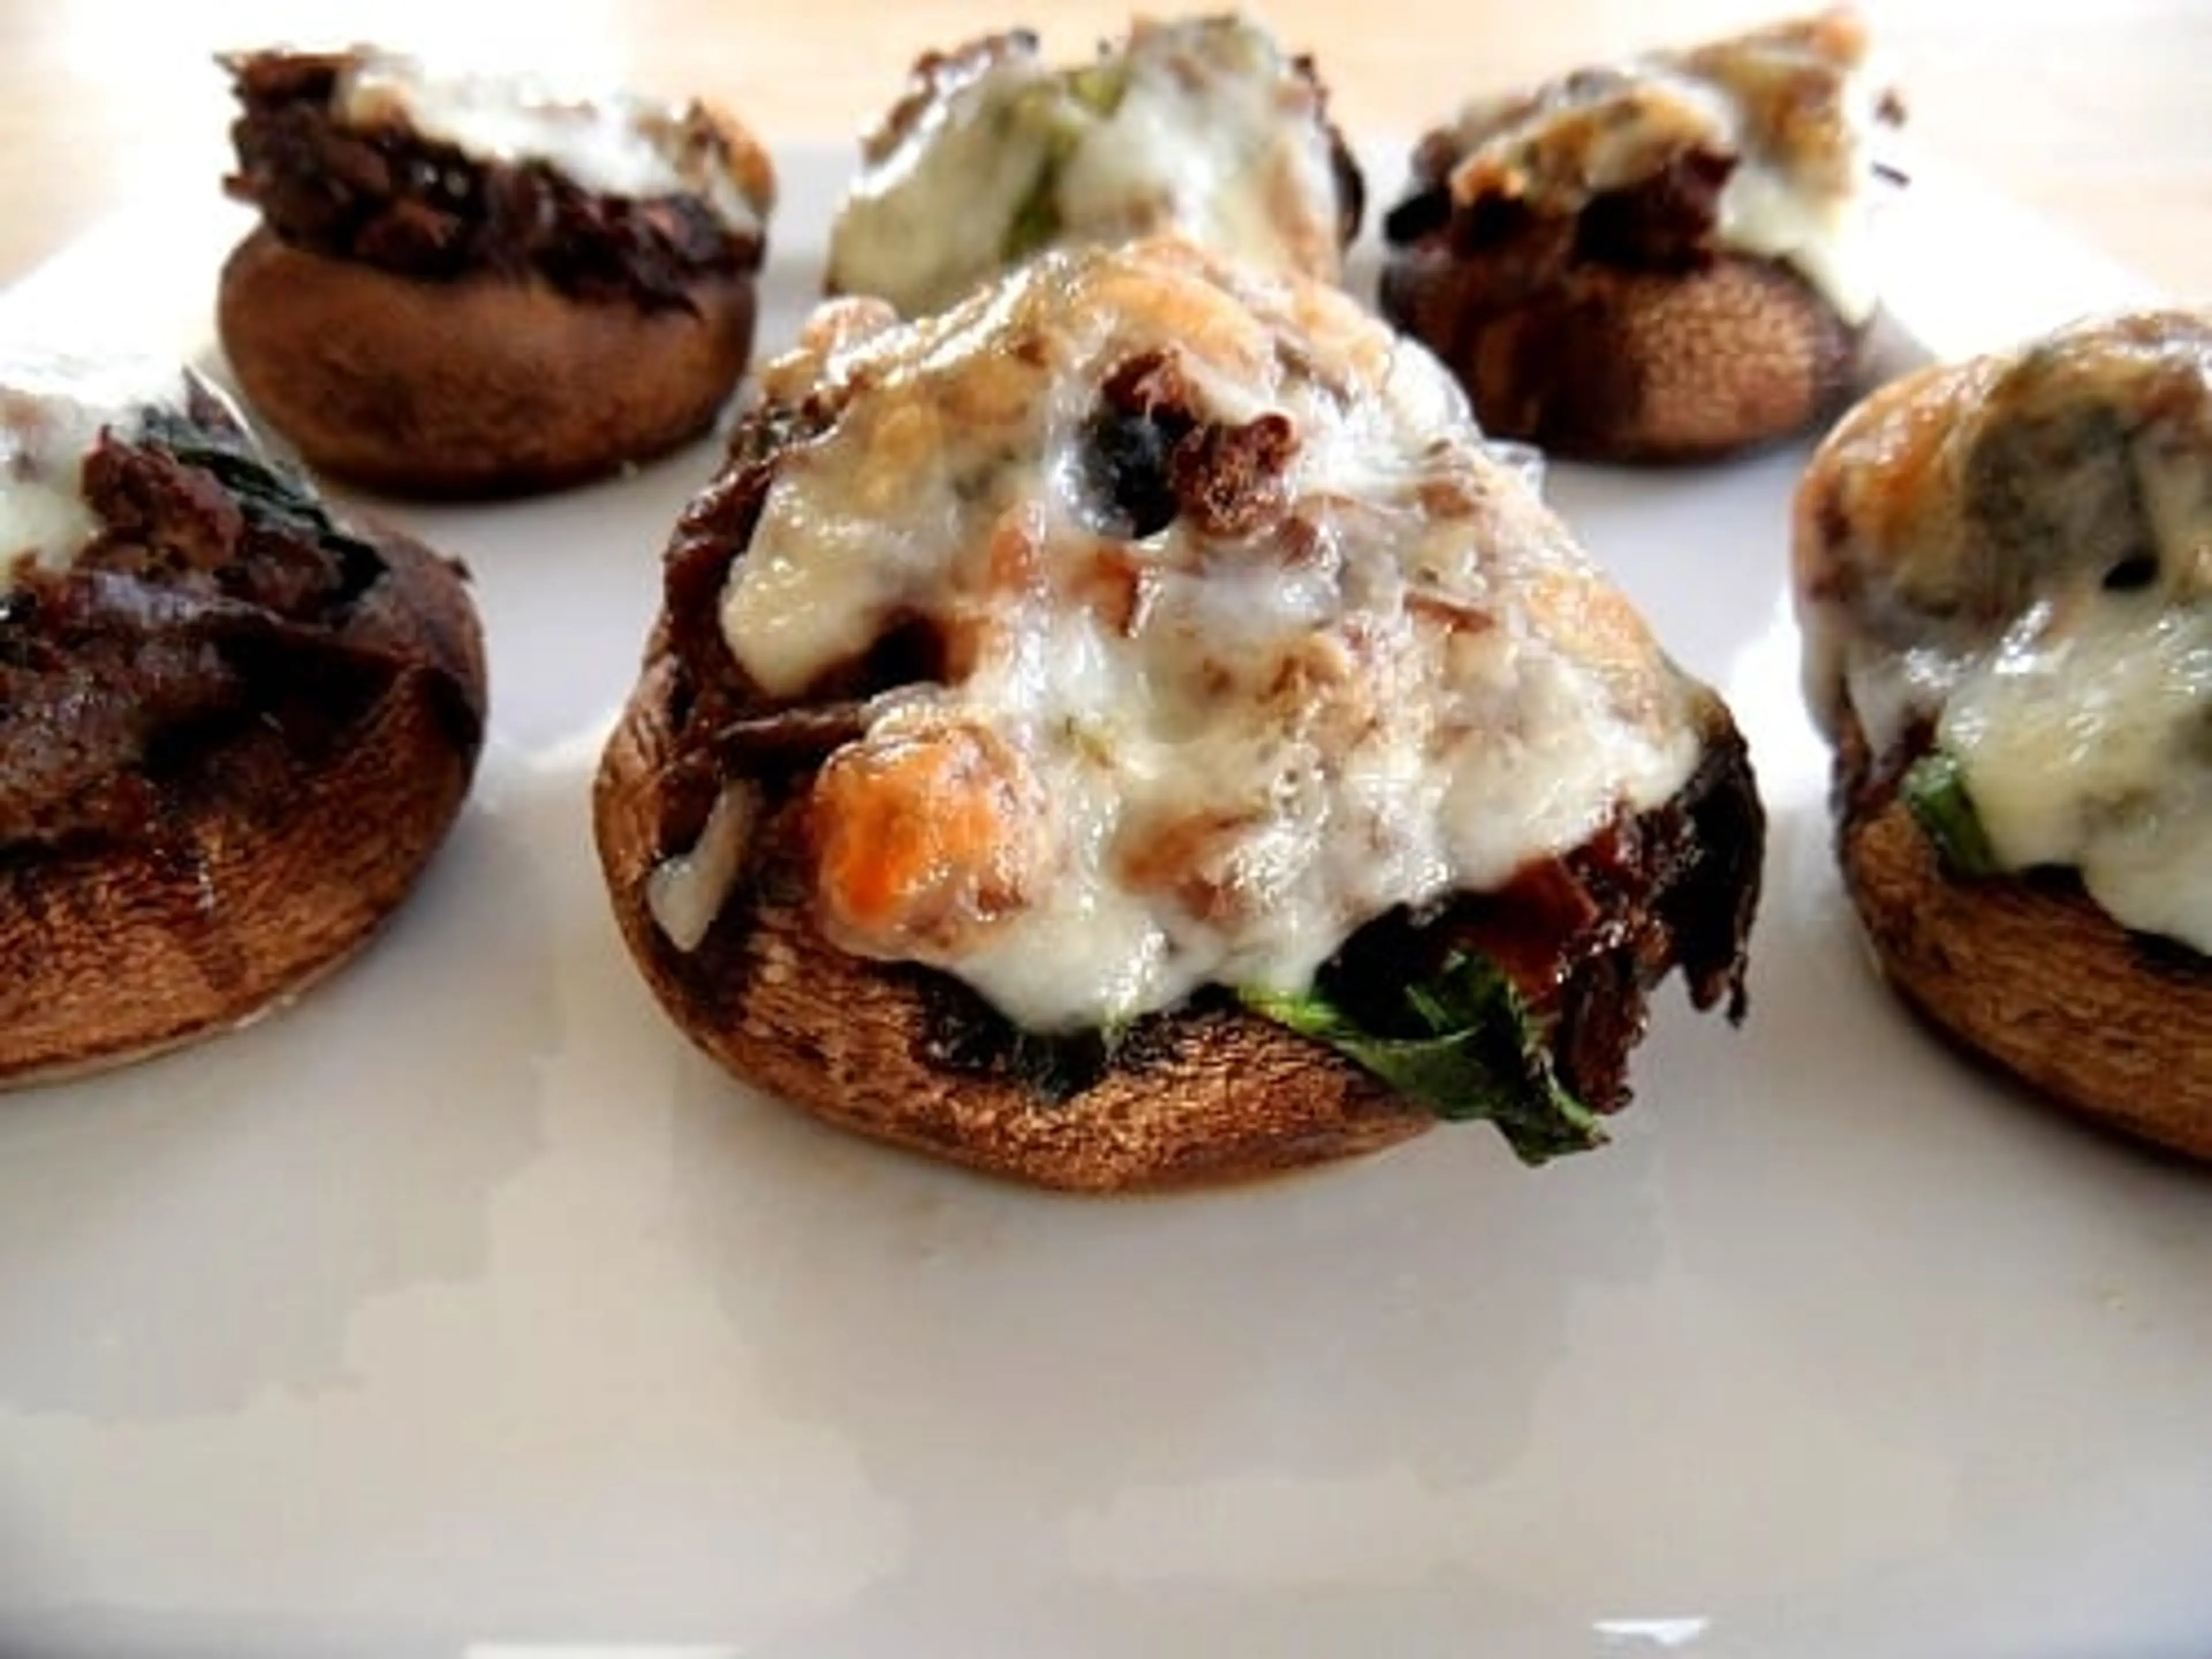 Meat & Spinach-Stuffed Mushrooms with Goat Cheese